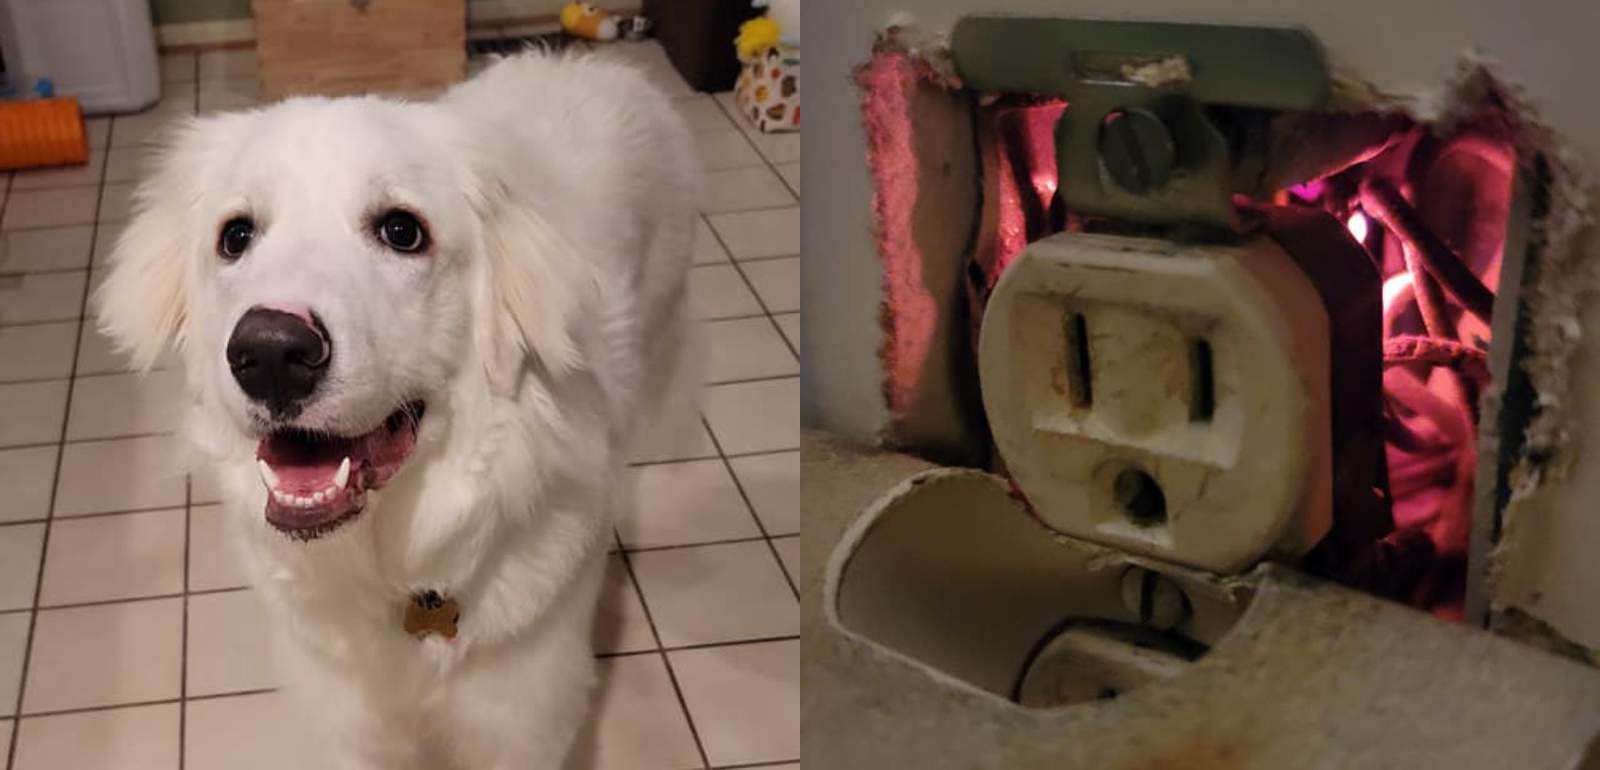 ’Our house would’ve been up in flames’: Dog alerts family to small fire behind outlet